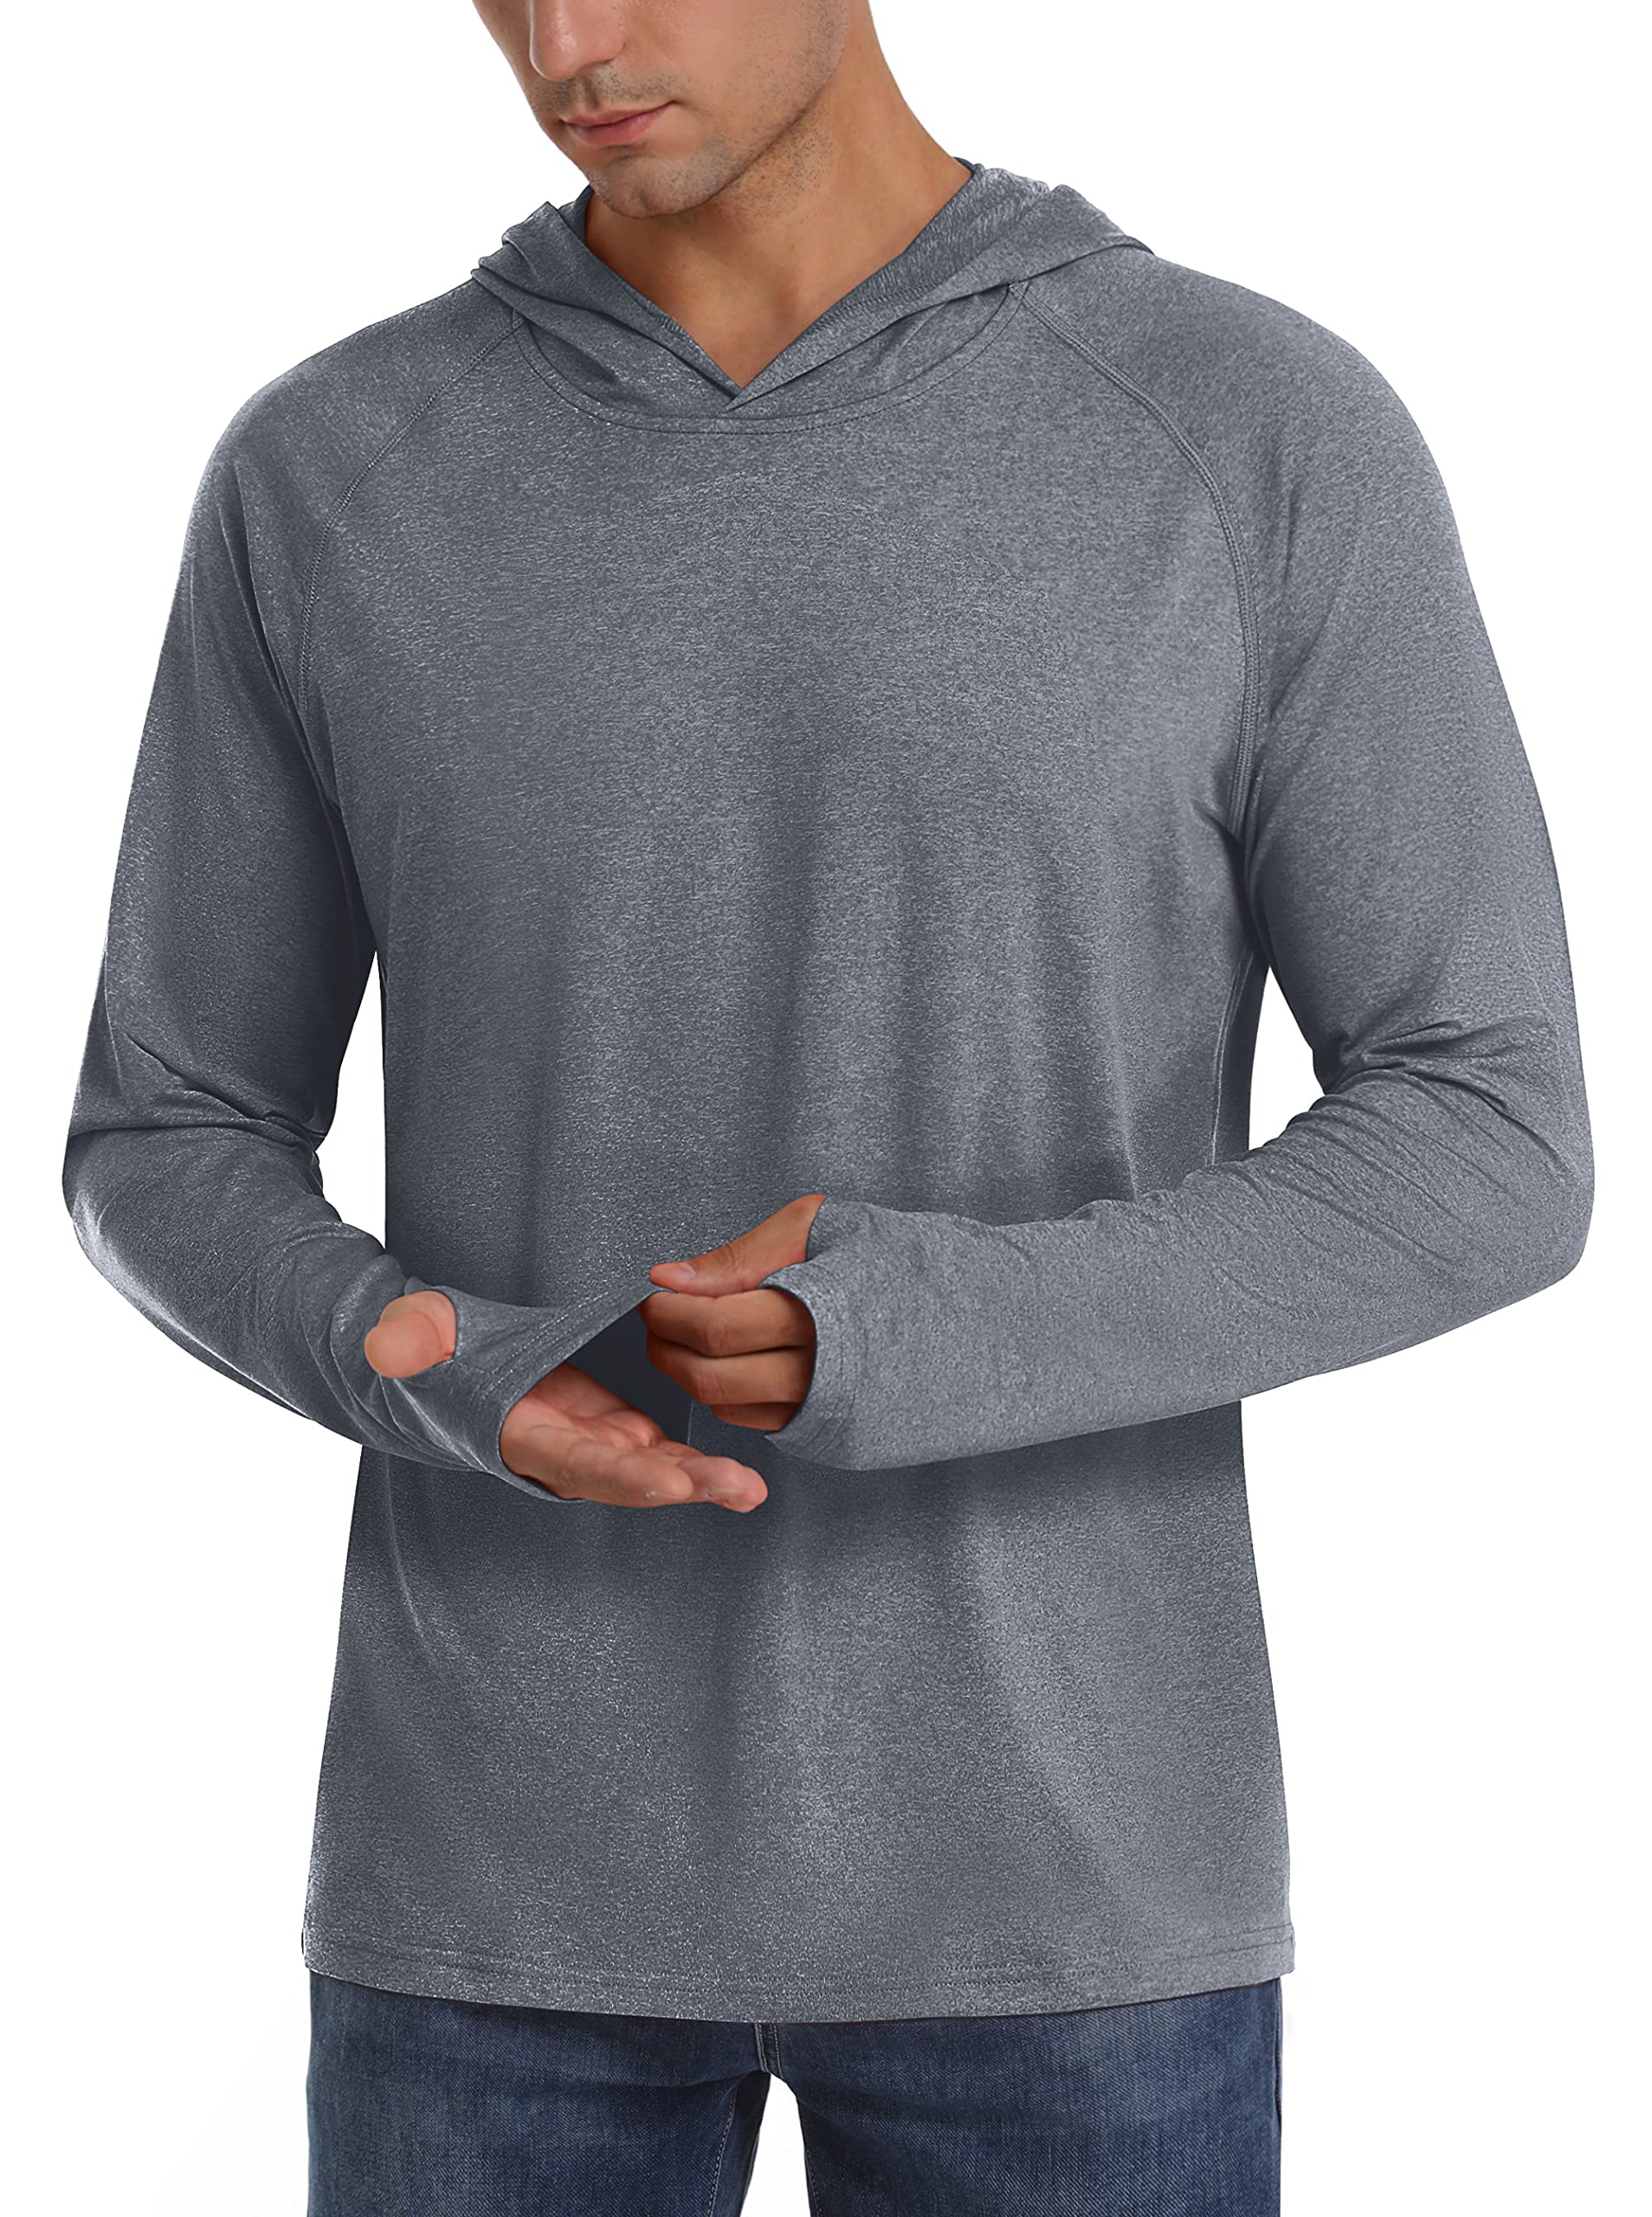 UPF 50+ Sun Protection Hoodie Shirts Men's Long Sleeve T-shirts Lightweight Quick Dry Pullovers Casual Fishing Tee Tops The Clothing Company Sydney